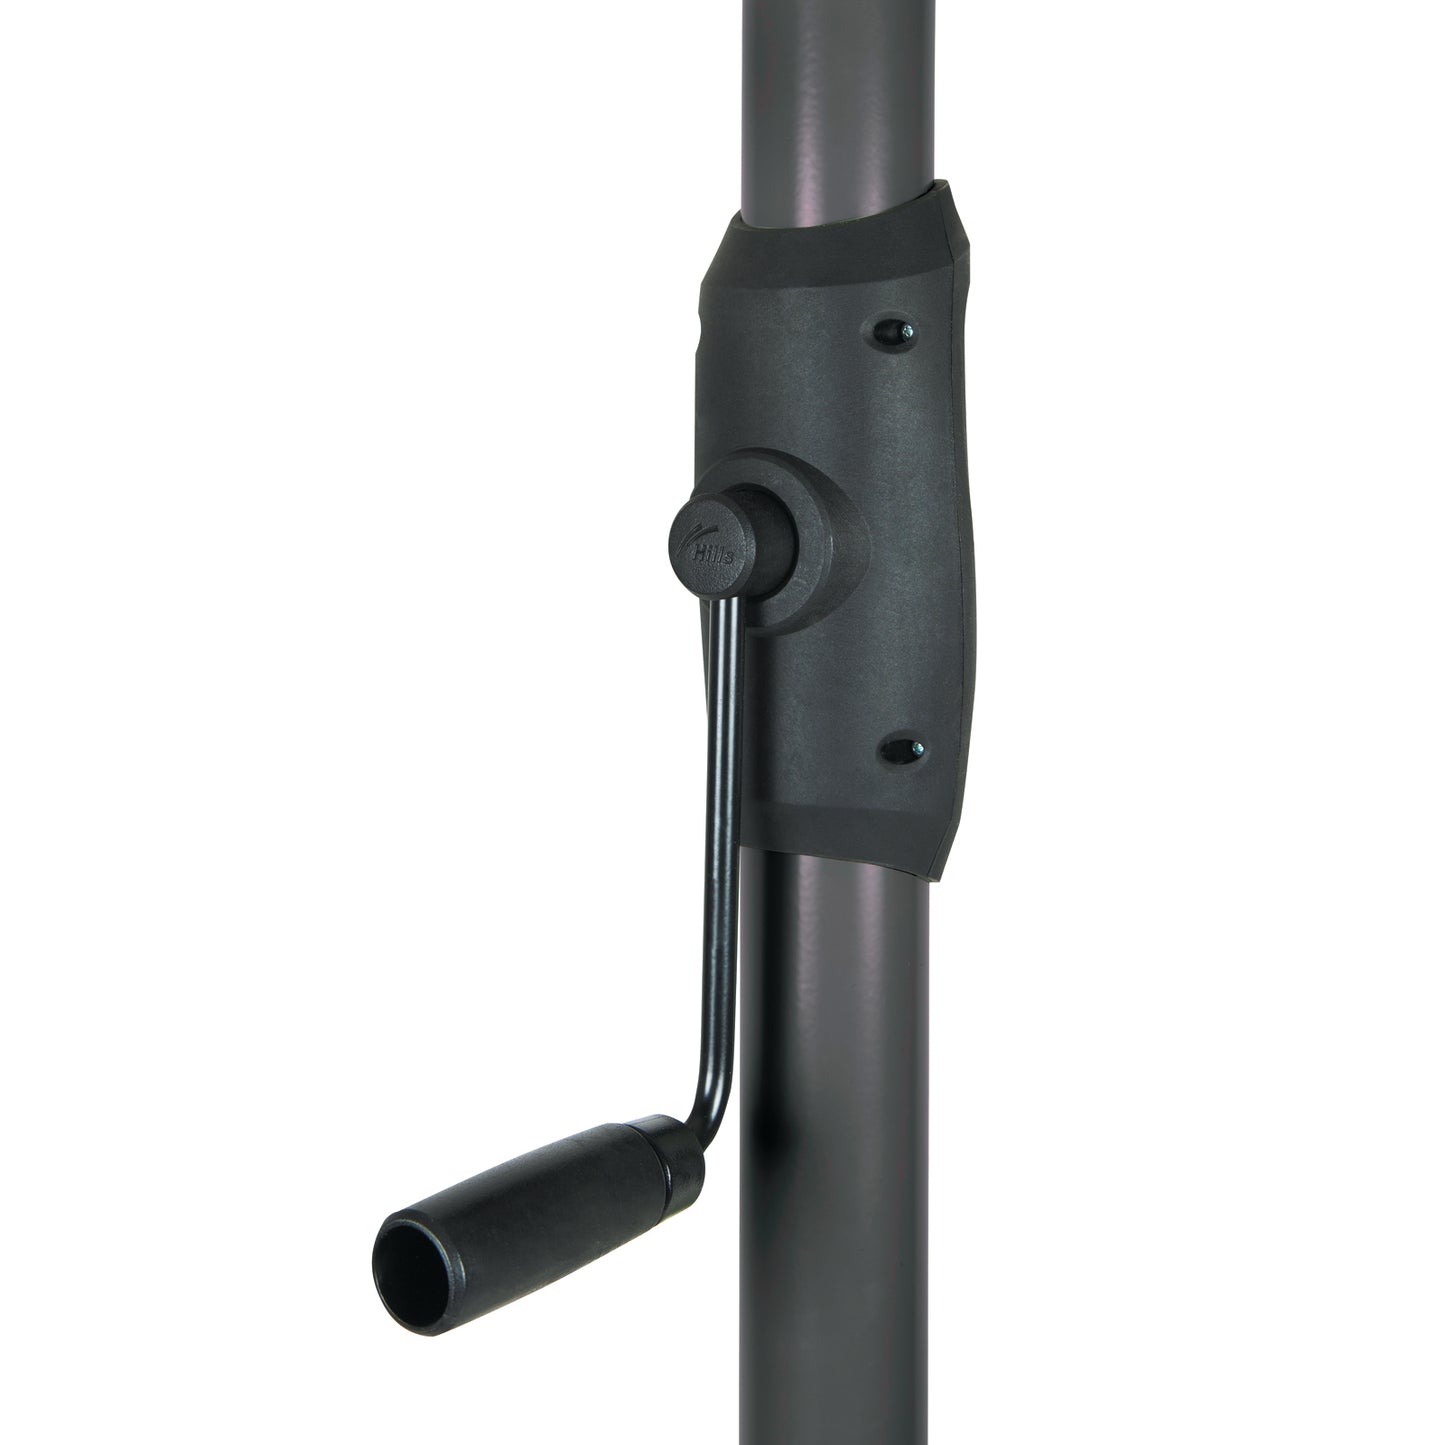 Hills Rotary 8 Hoist in Monument Grey